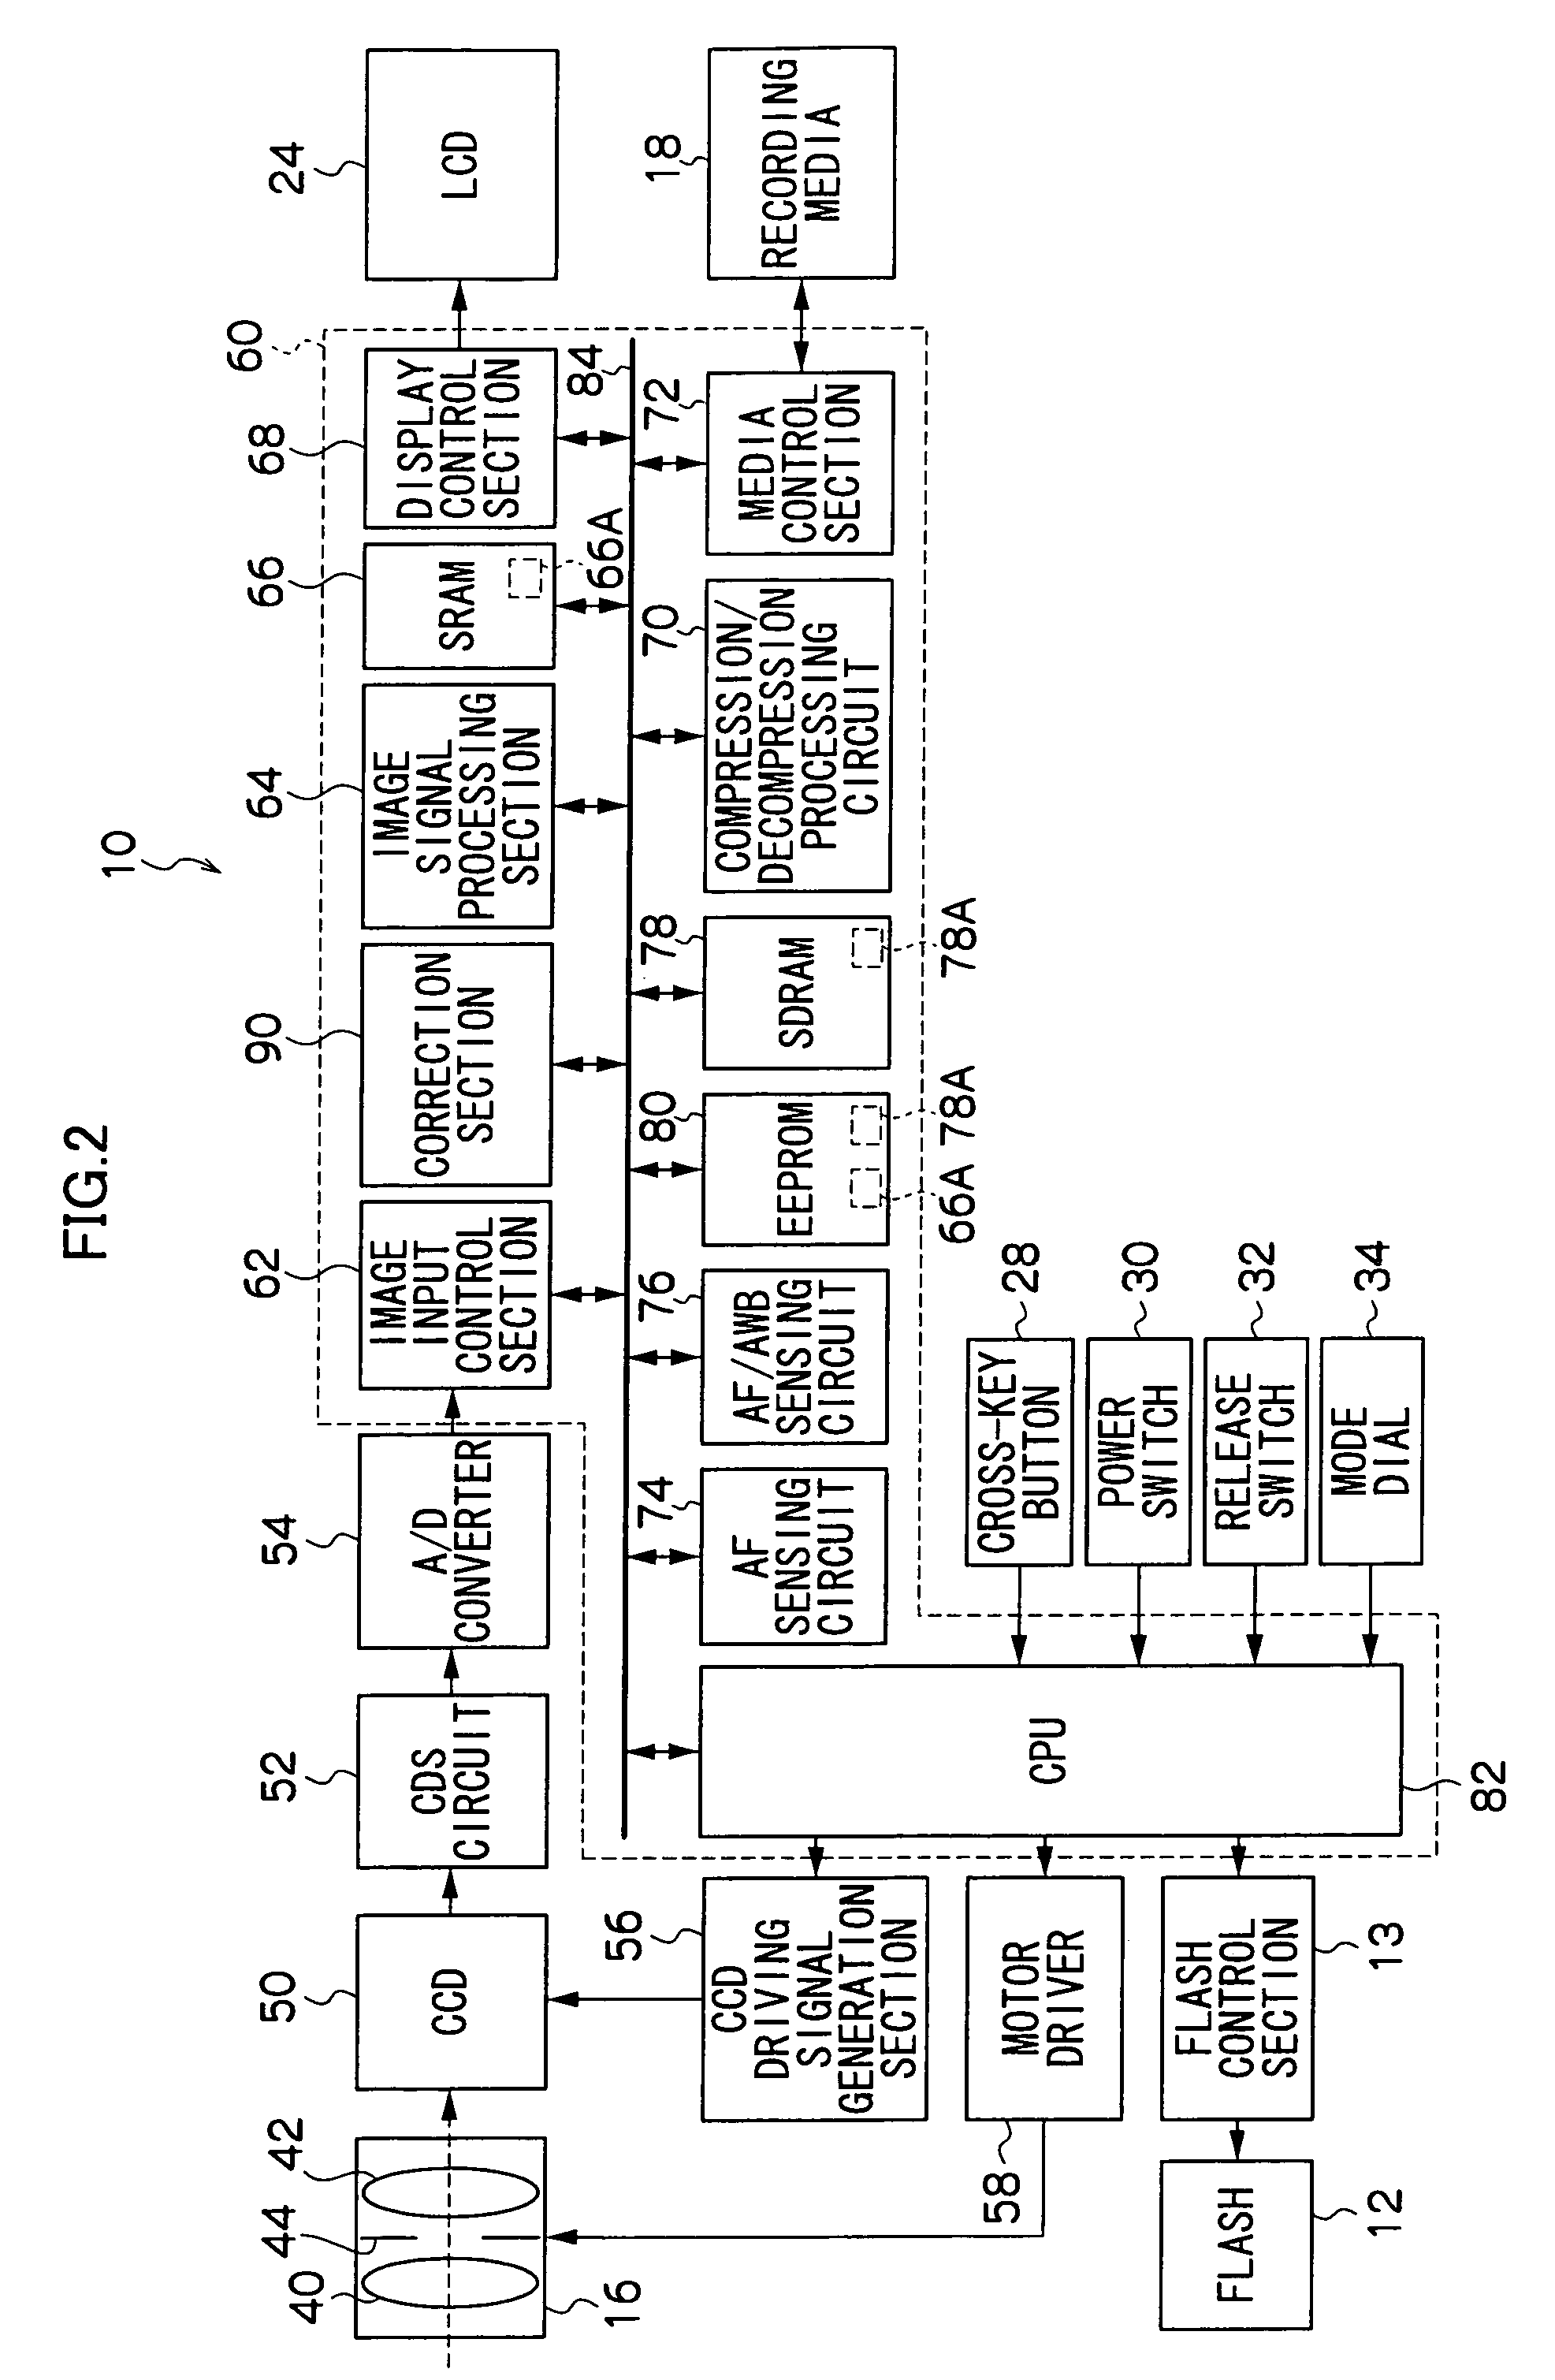 Image capture device and image data correction process of image capture device